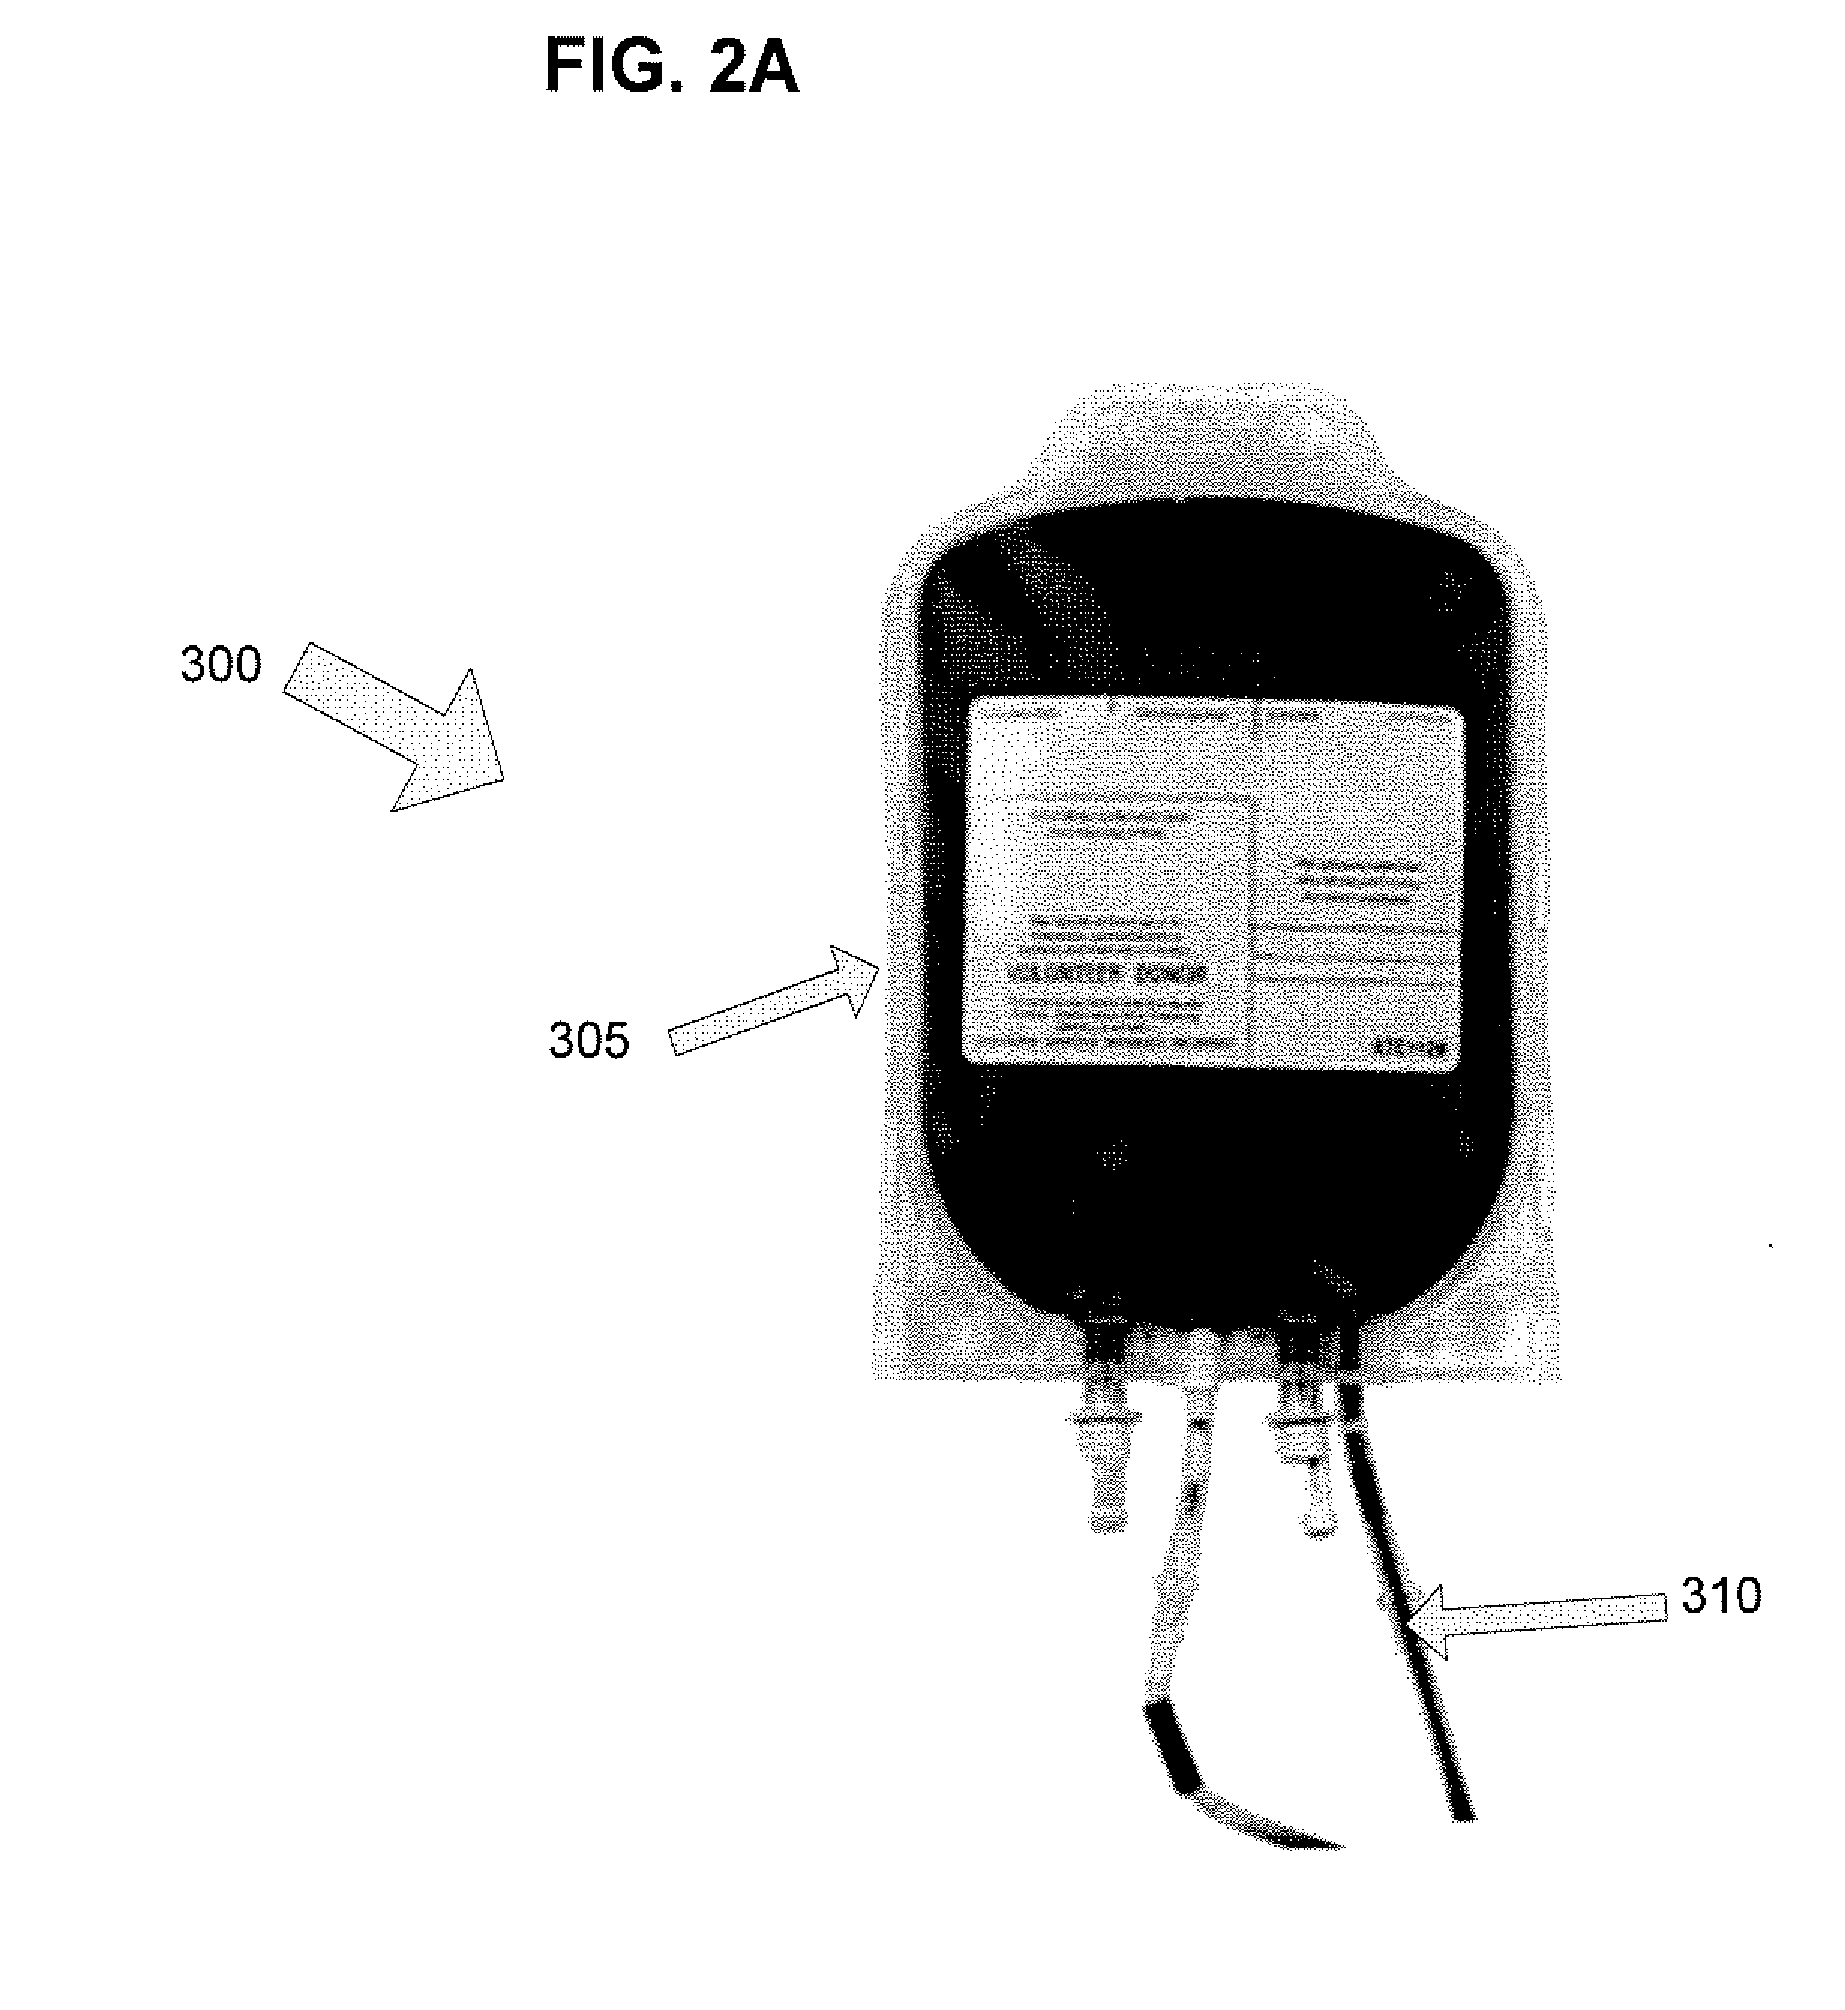 Vasodilator eluting blood storage and administration devices with a specific polyphosphazene coating and methods for their manufacture and use